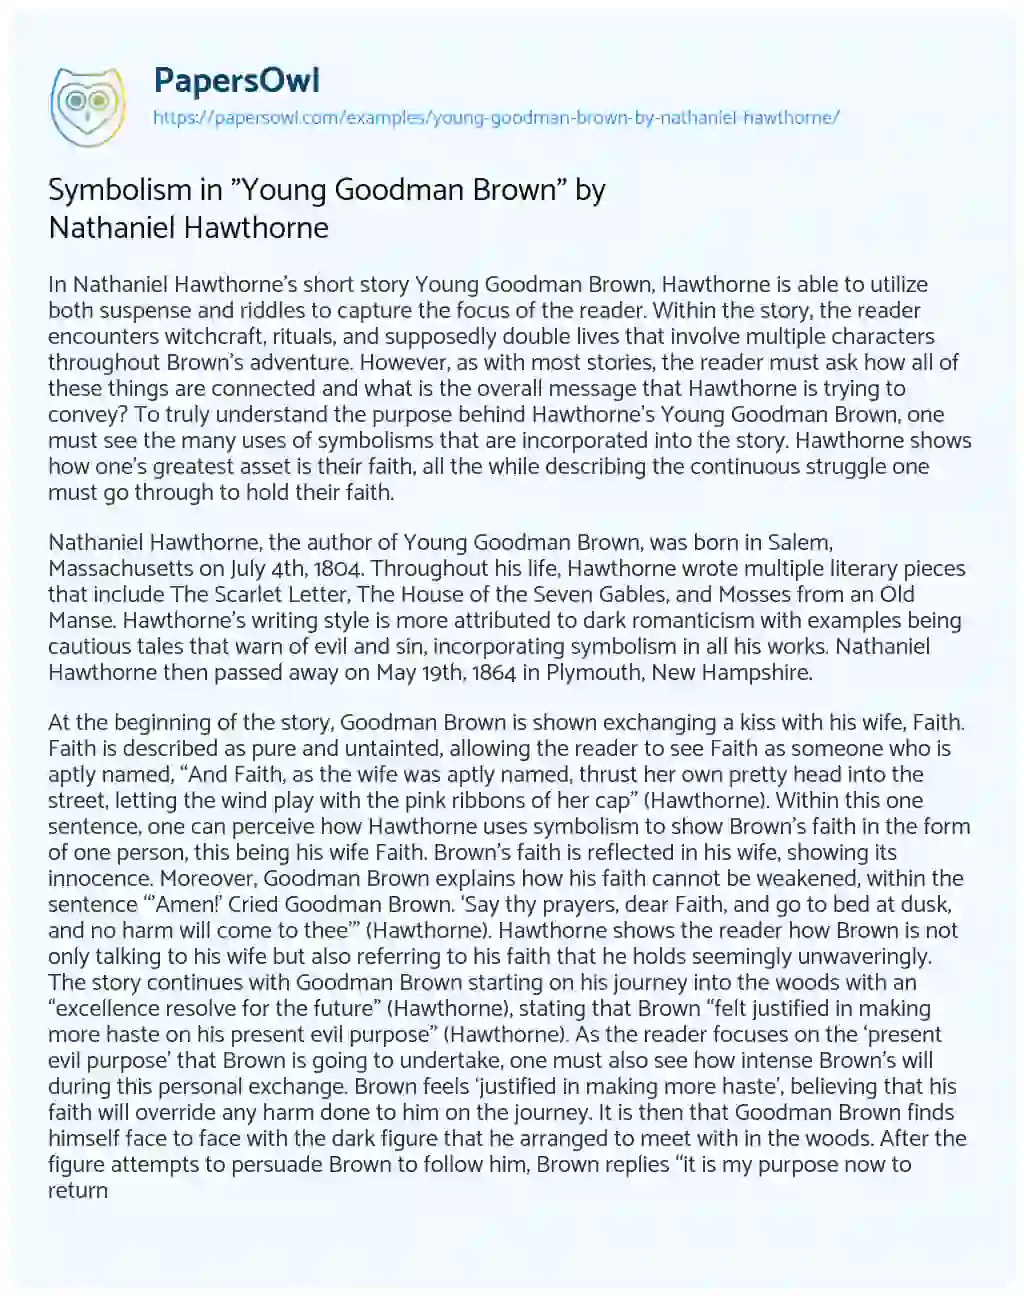 Symbolism in “Young Goodman Brown” by Nathaniel Hawthorne essay